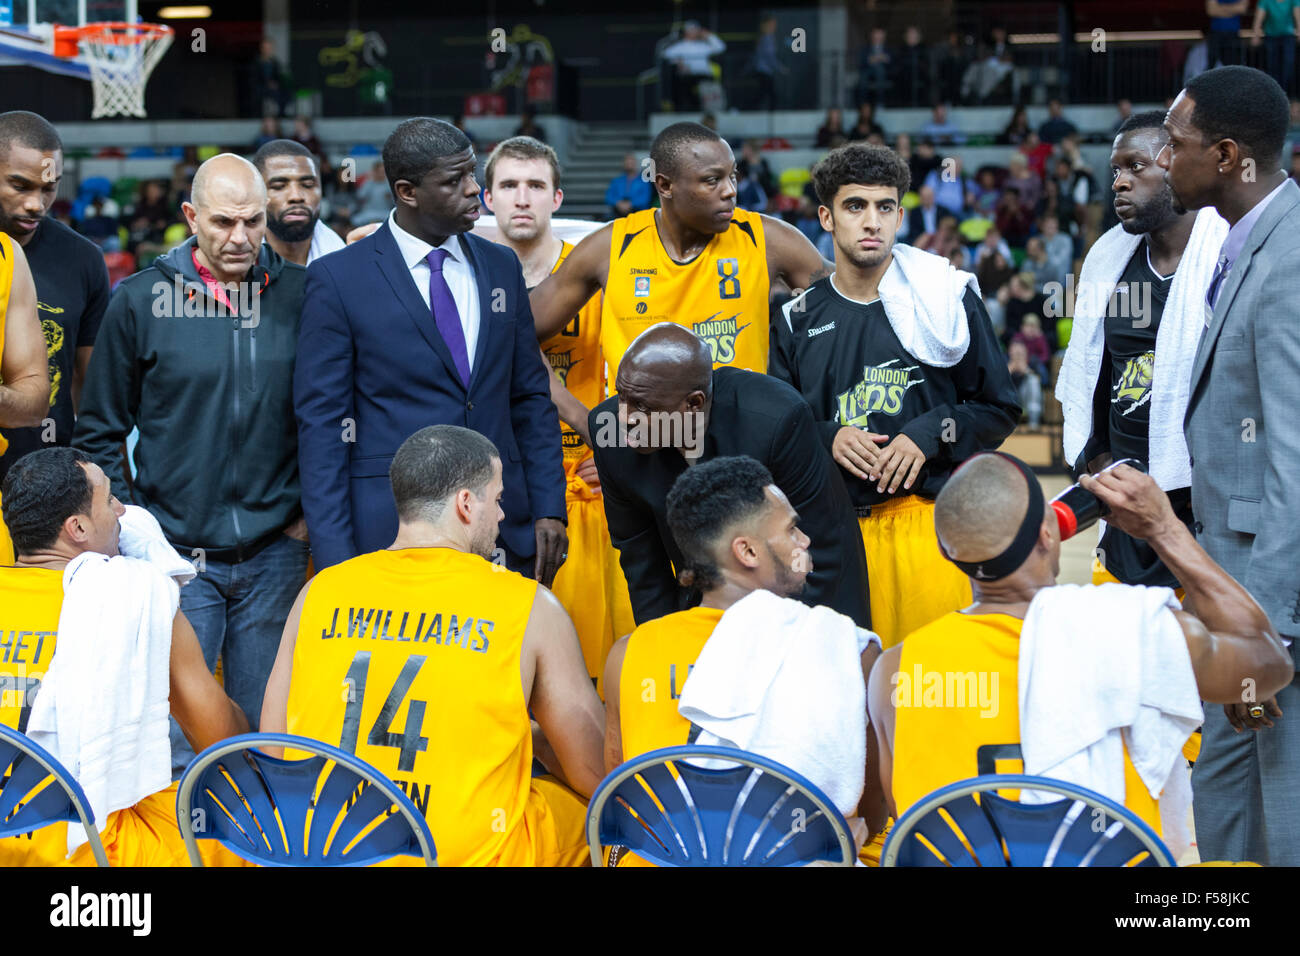 London, UK. 29th Oct, 2015. Coach Nigel Lloyd and Assistant Coach Laurent Irish talk to their players during the London Lions vs. Manchester Giants BBL game at the Copper Box Arena in the Olympic Park. Manchester Giants win 90-82. Credit:  Imageplotter/Alamy Live News Stock Photo